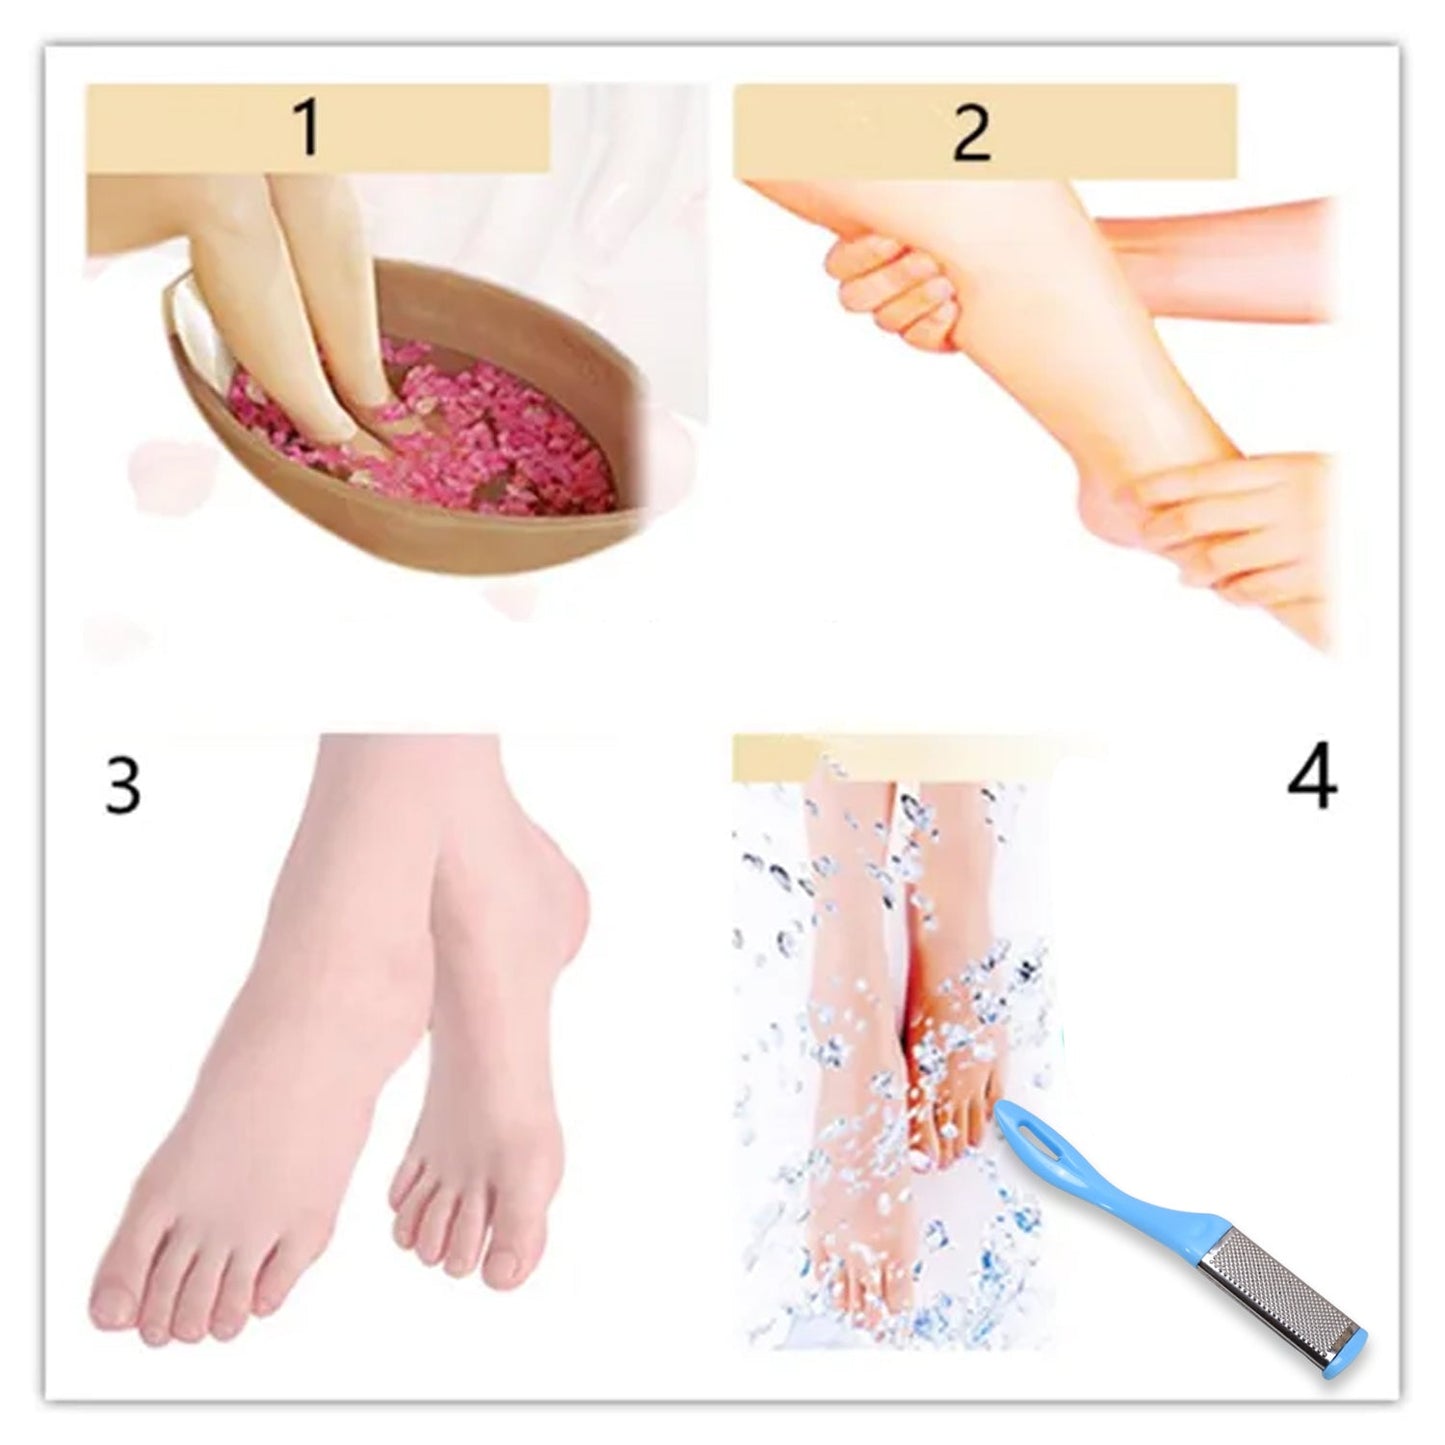 6479 Removing Hard, Cracked, Dead Skin Cells - Professional Callus Remover Foot Corn Remover DeoDap